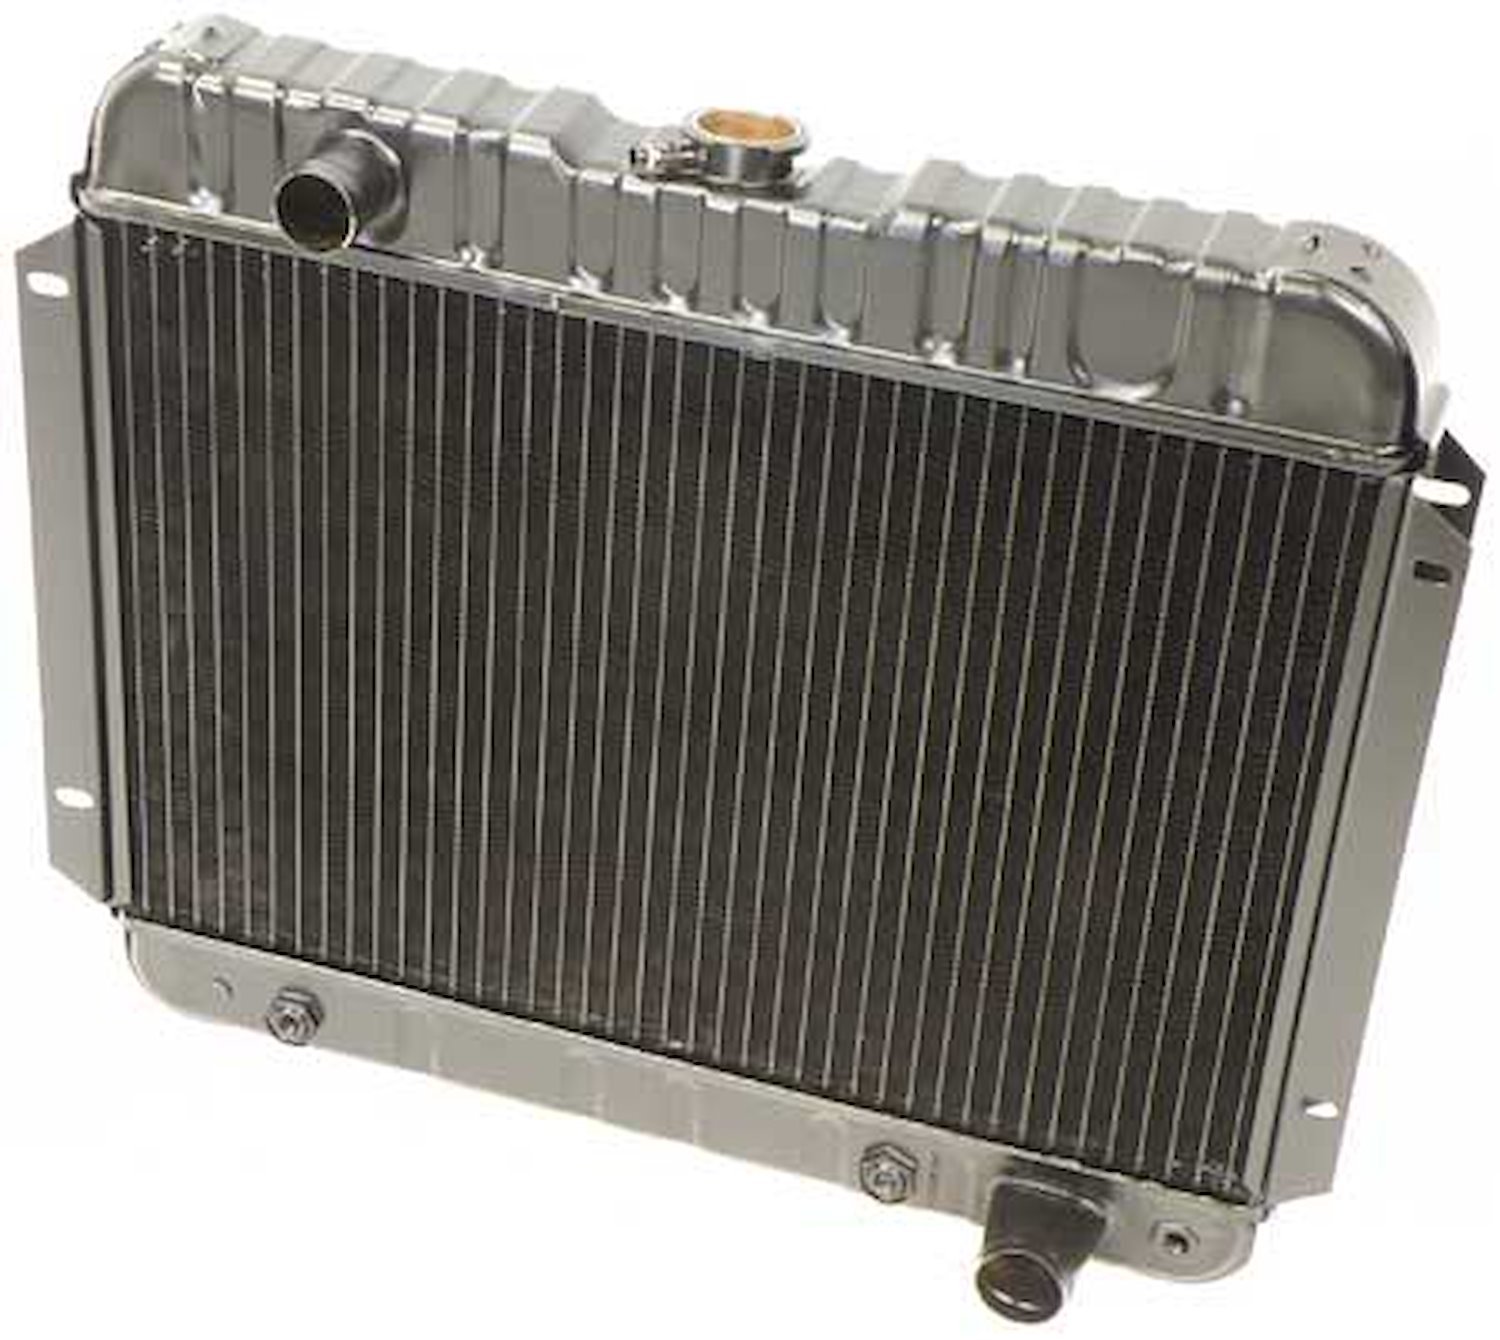 CRD1313A Radiator-1963-67 Inova V8 283/327 W/ AT-3 Row Inlet On Driver Side (15-1/2" X 23-1/2" X 2" Core)